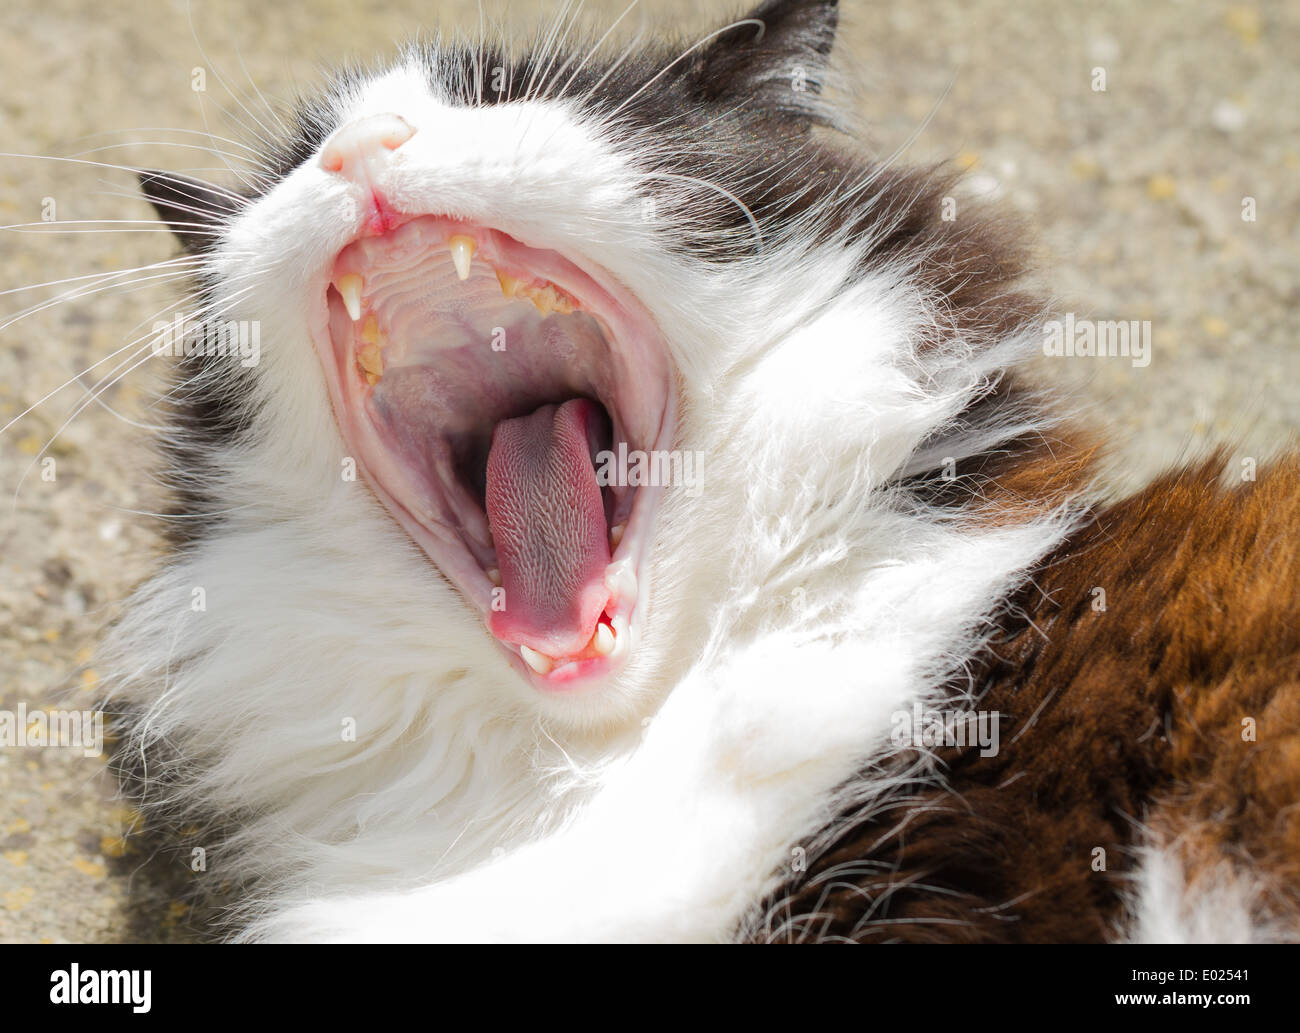 Domestic cat yawning showing teeth, tongue and papillae Stock Photo